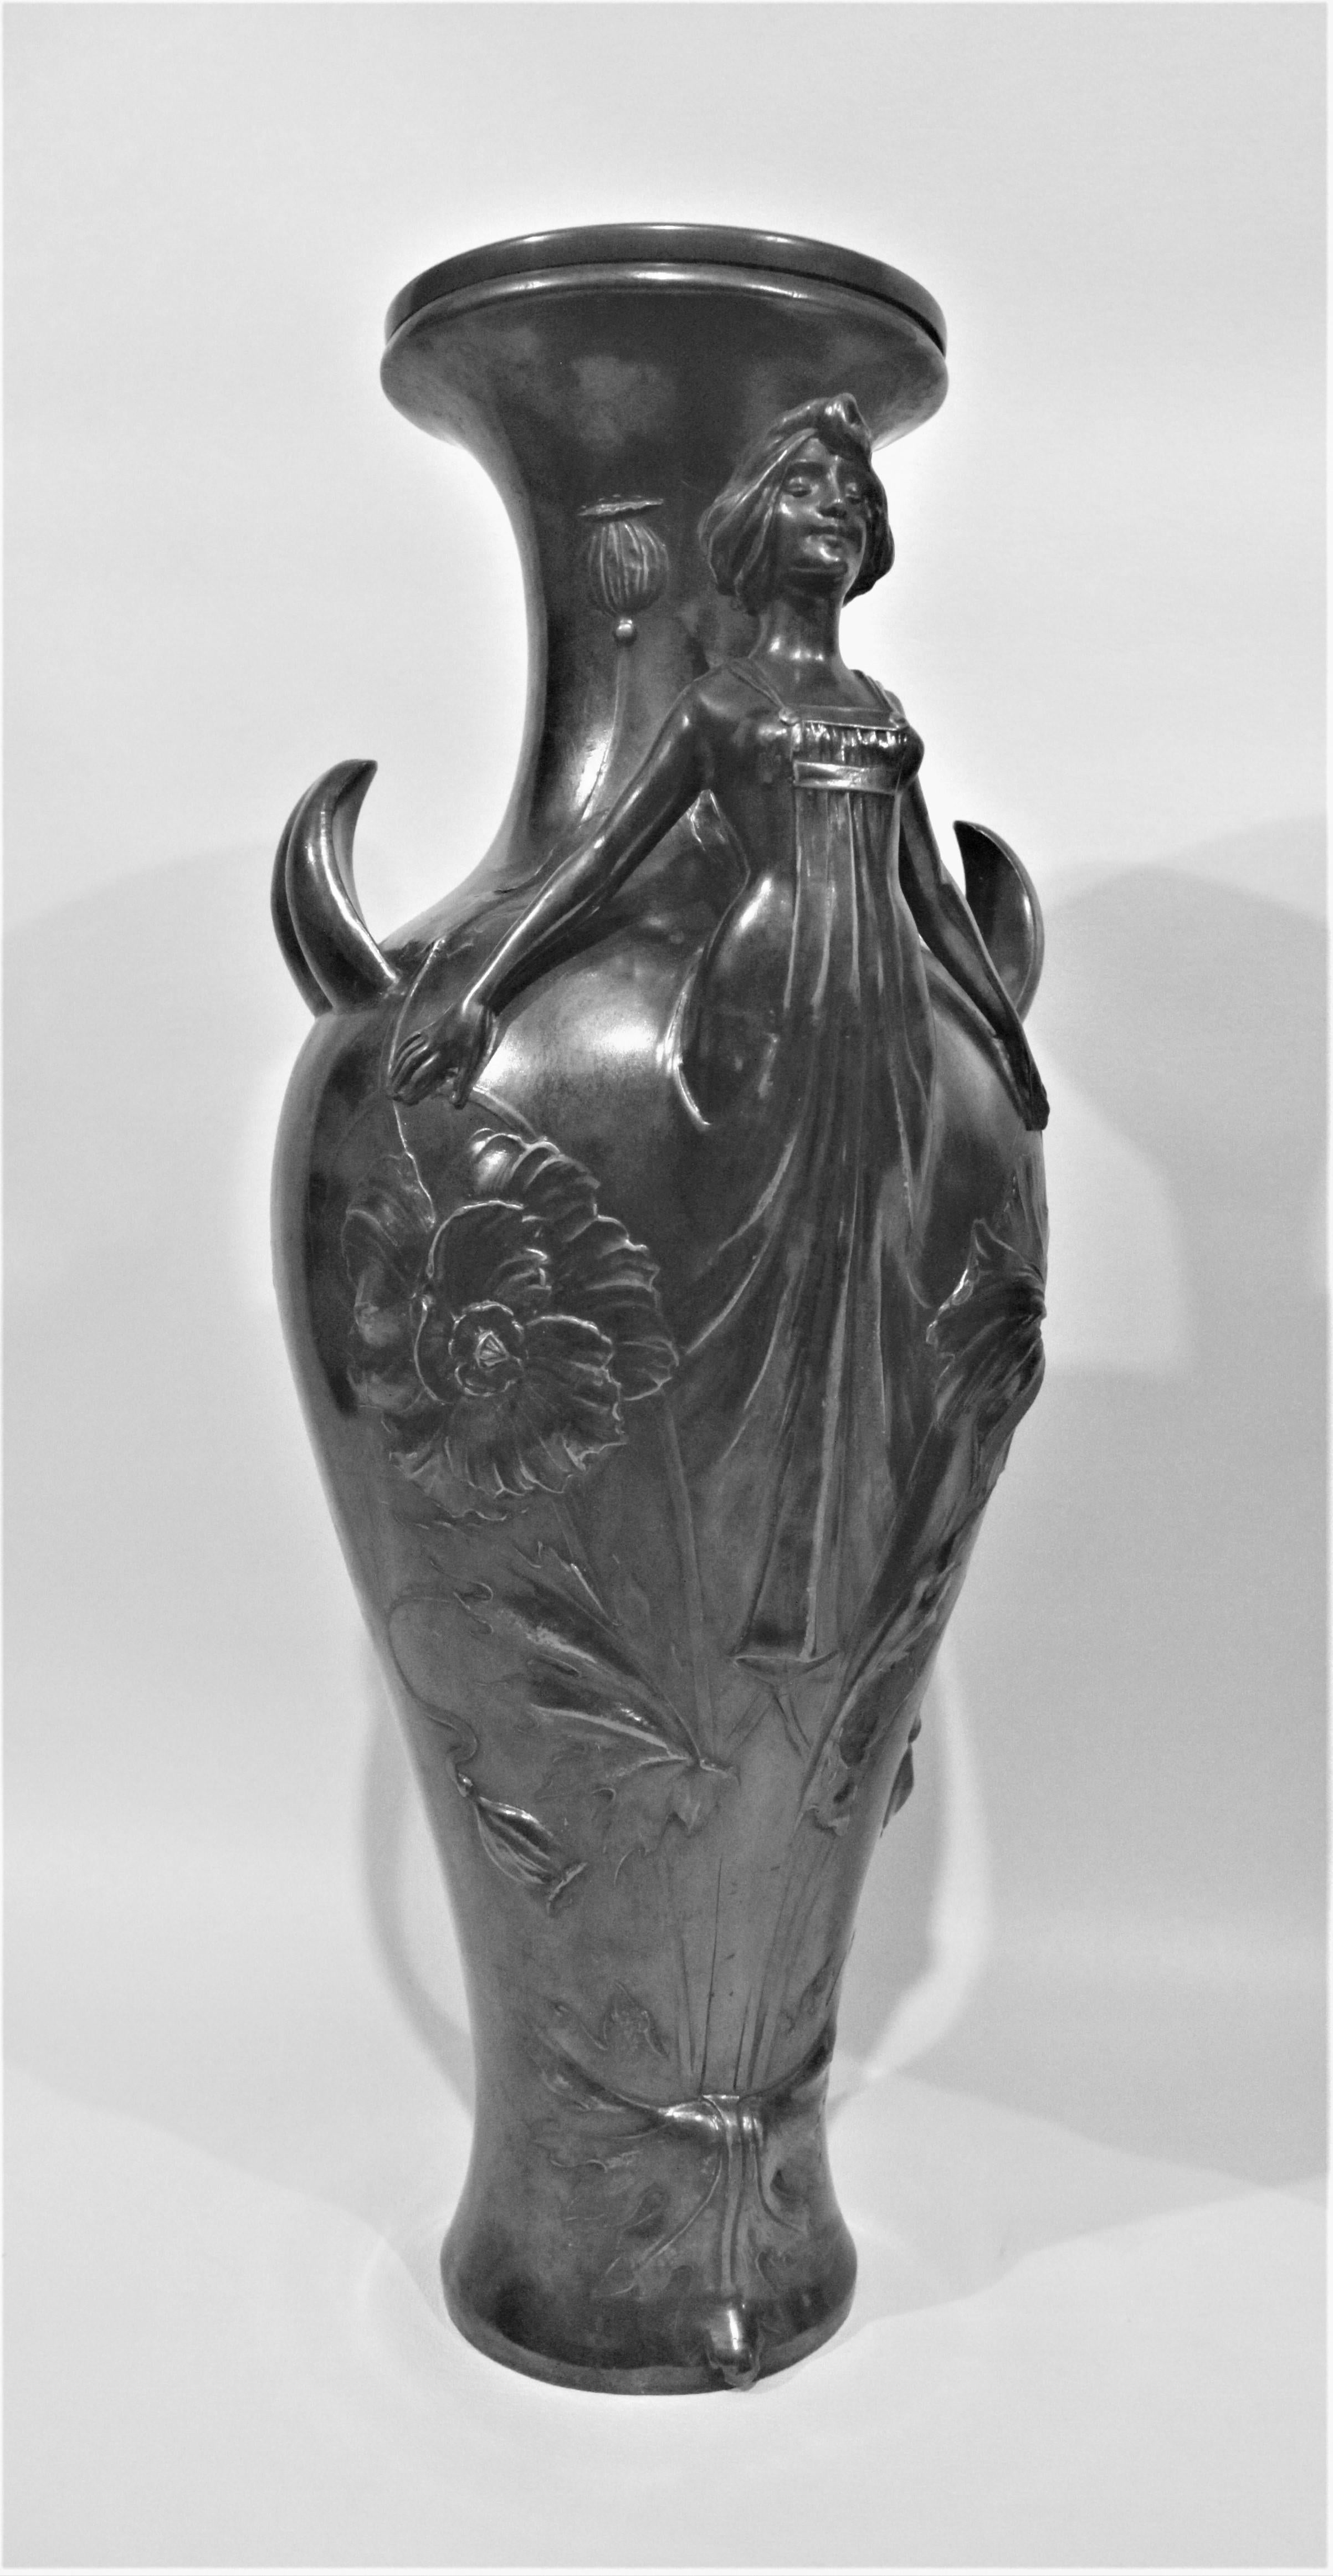 Pair of Art Nouveau Silver Plated Vases with Stylized Female Figures For Sale 1